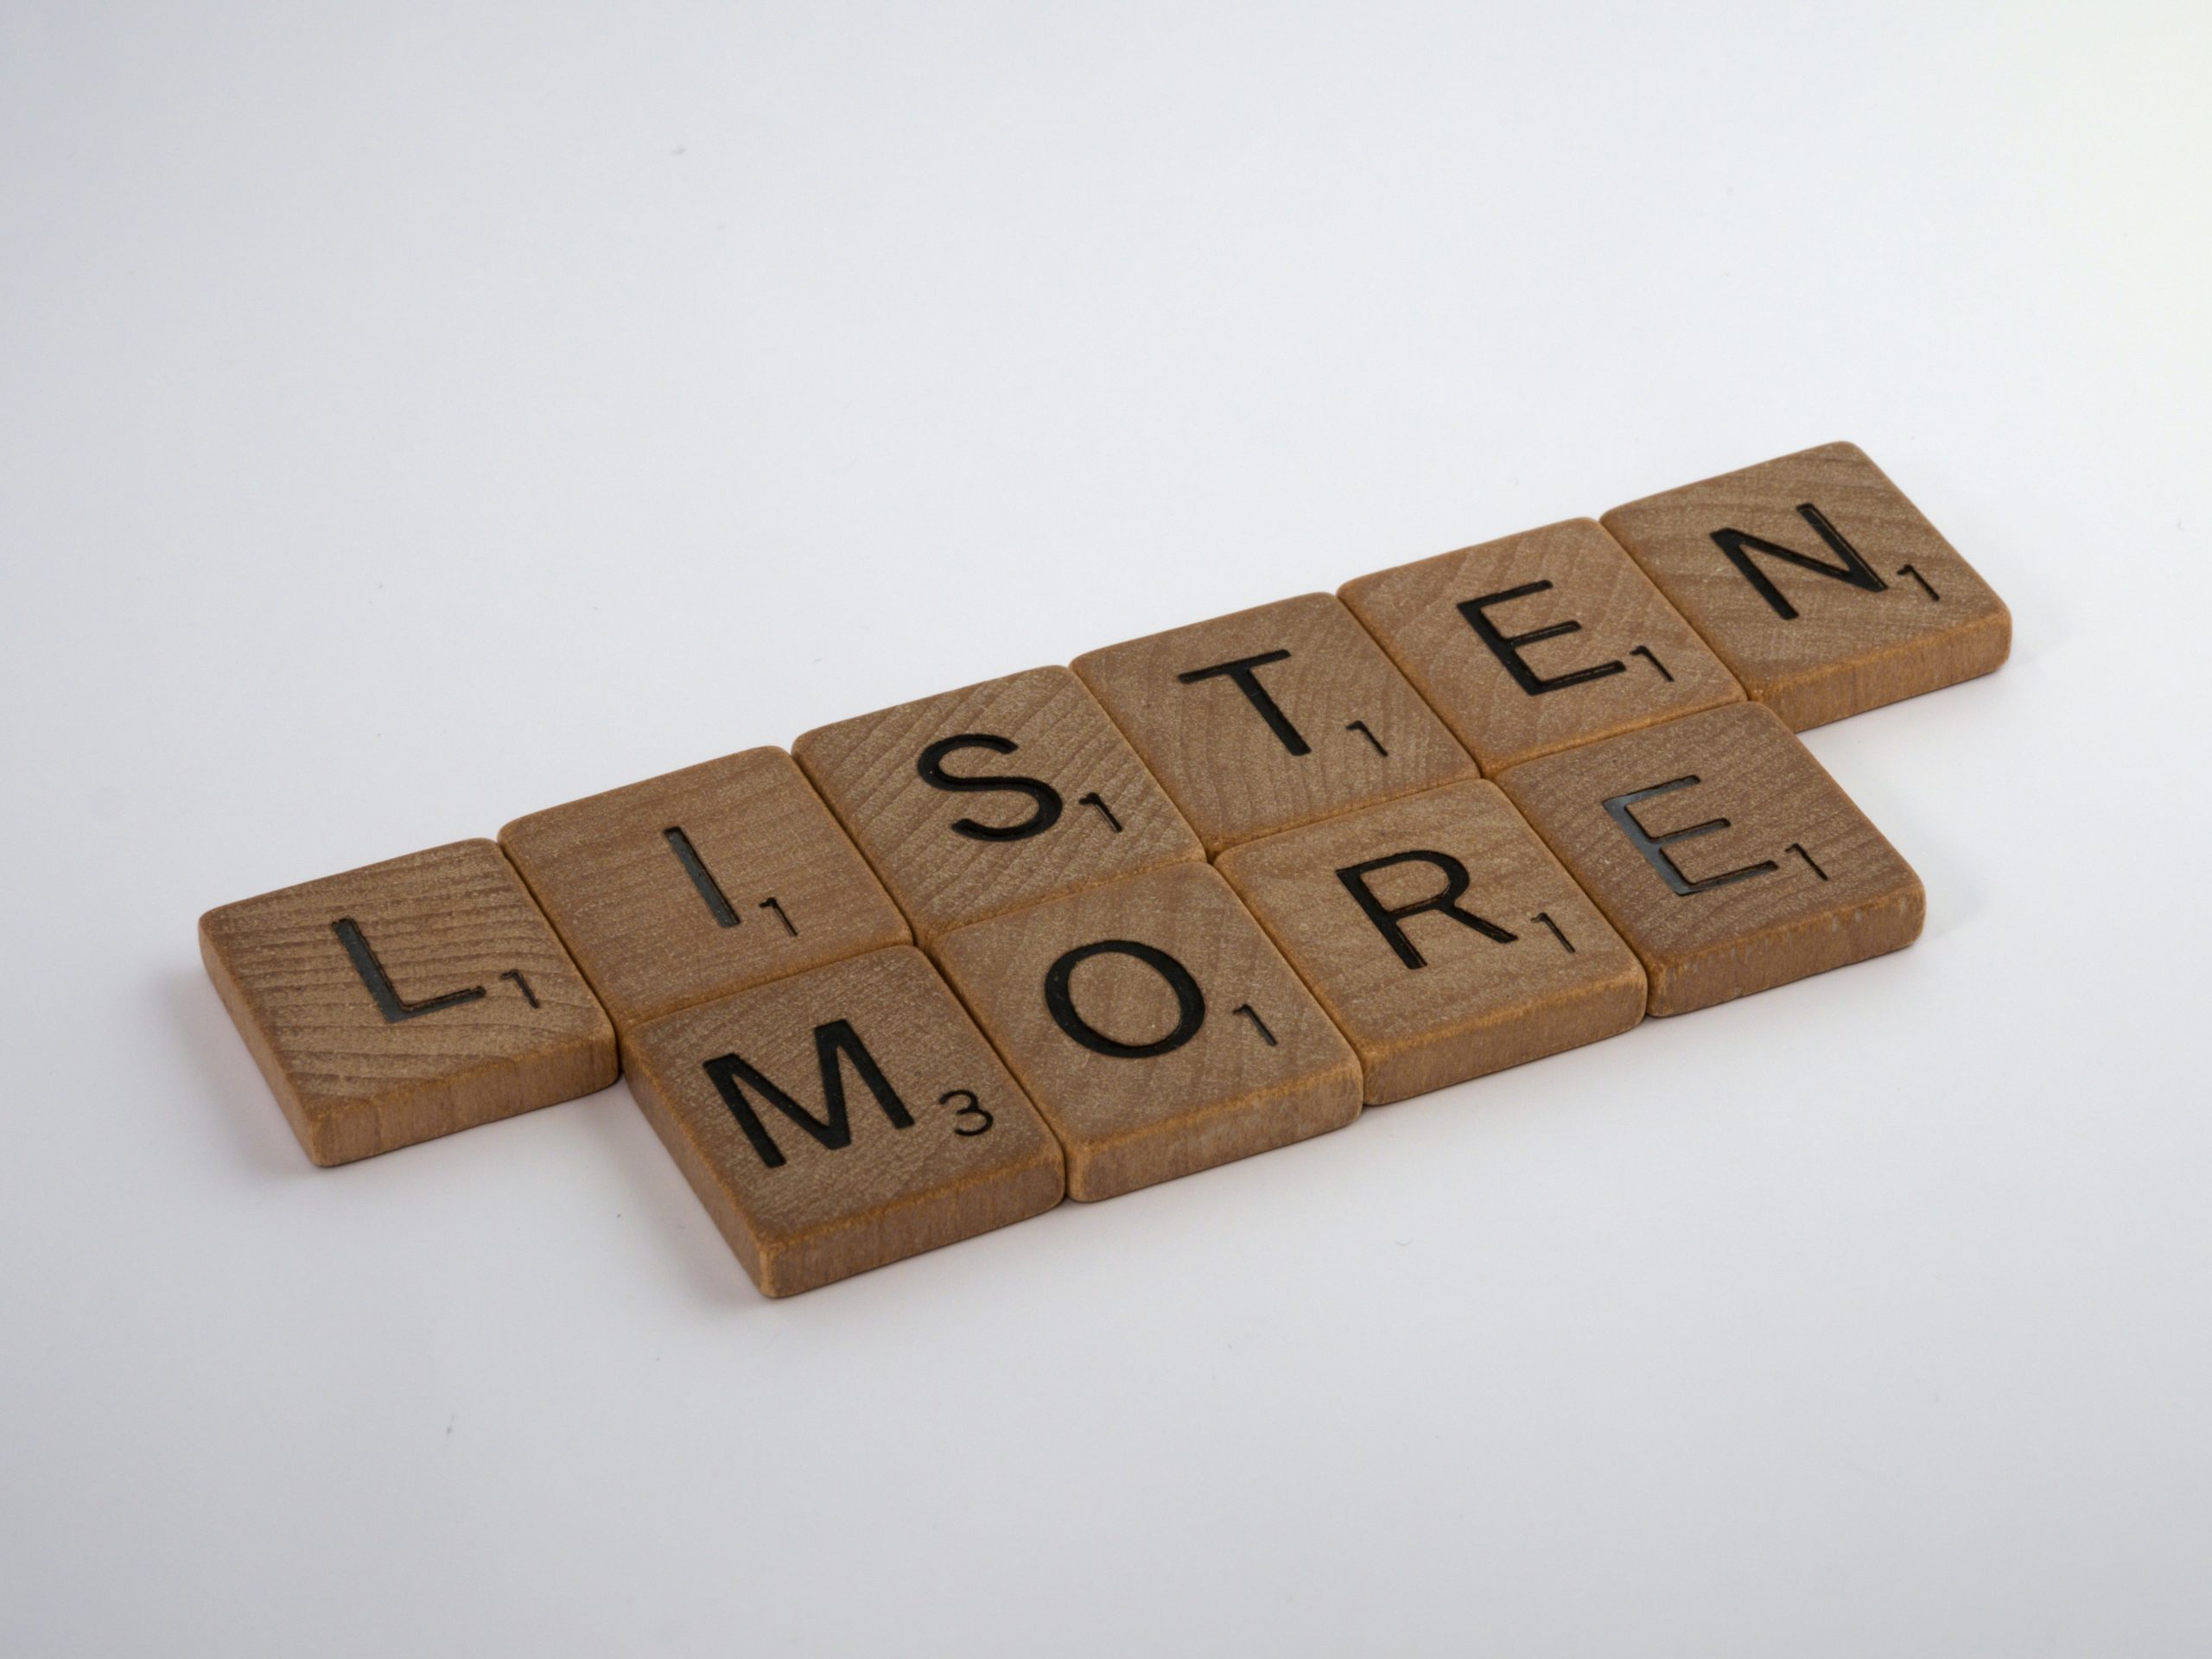 Talk to Us Month: Becoming a Better Listener